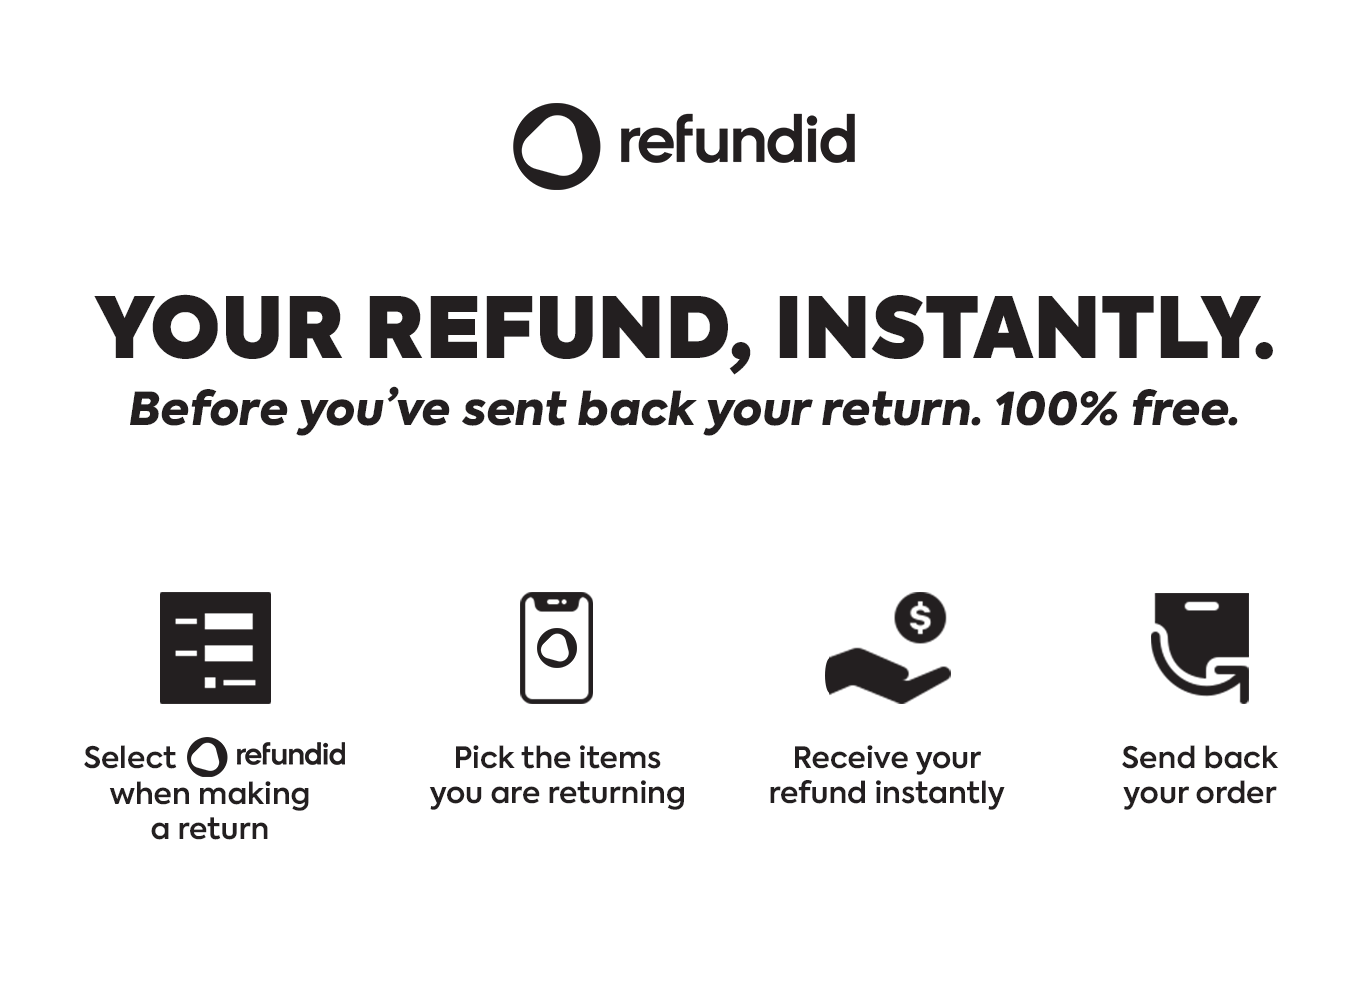 Refundid. Your refund, instantly. Before you've sent back your return. 100% free.               Select refundid when making a return.               Pick the items you are returning.               Receive your refund instantly.               Send back your order.